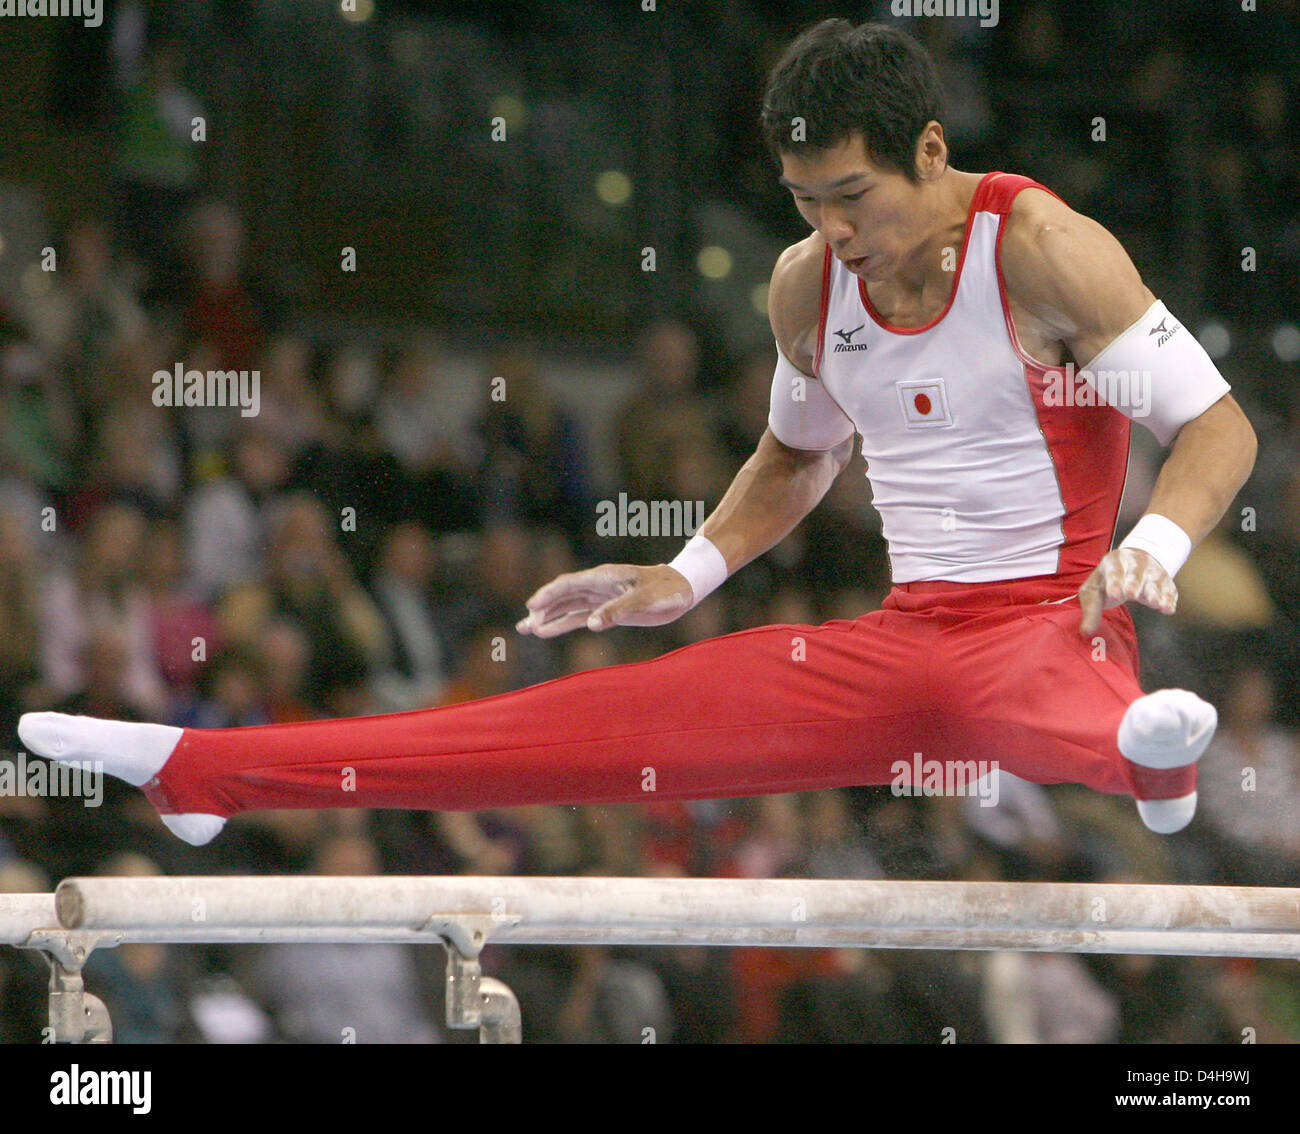 Japanese artistic gymnast Hisashi Mizutori performs on the parallel bars during the 26th DTB (?Germany?s Artistic Gymnastics Association?) Champions Trophy at Porsche-Arena in Stuttgart, Germany, 16 November 2008. He placed second in the all-around competition. Photo: NORBERT FOERSTERLING Stock Photo